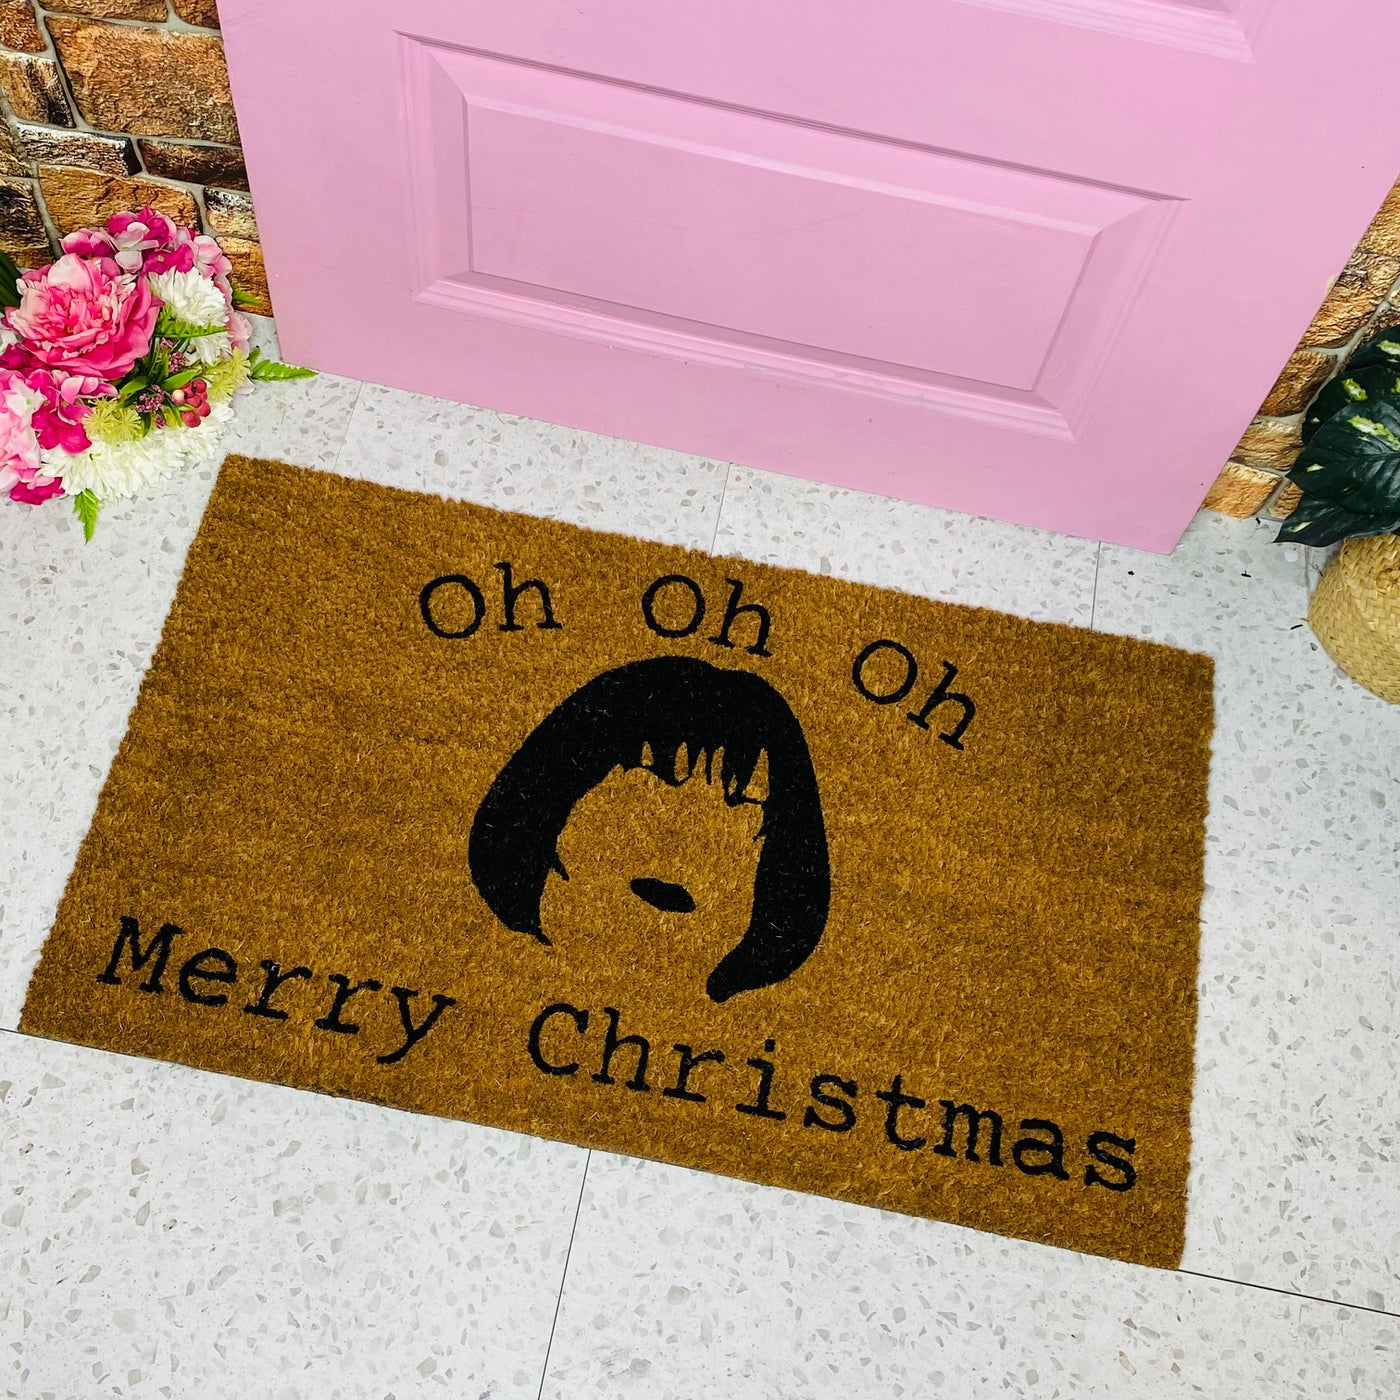 Oh Oh Oh - Nessa Funny Christmas Doormat